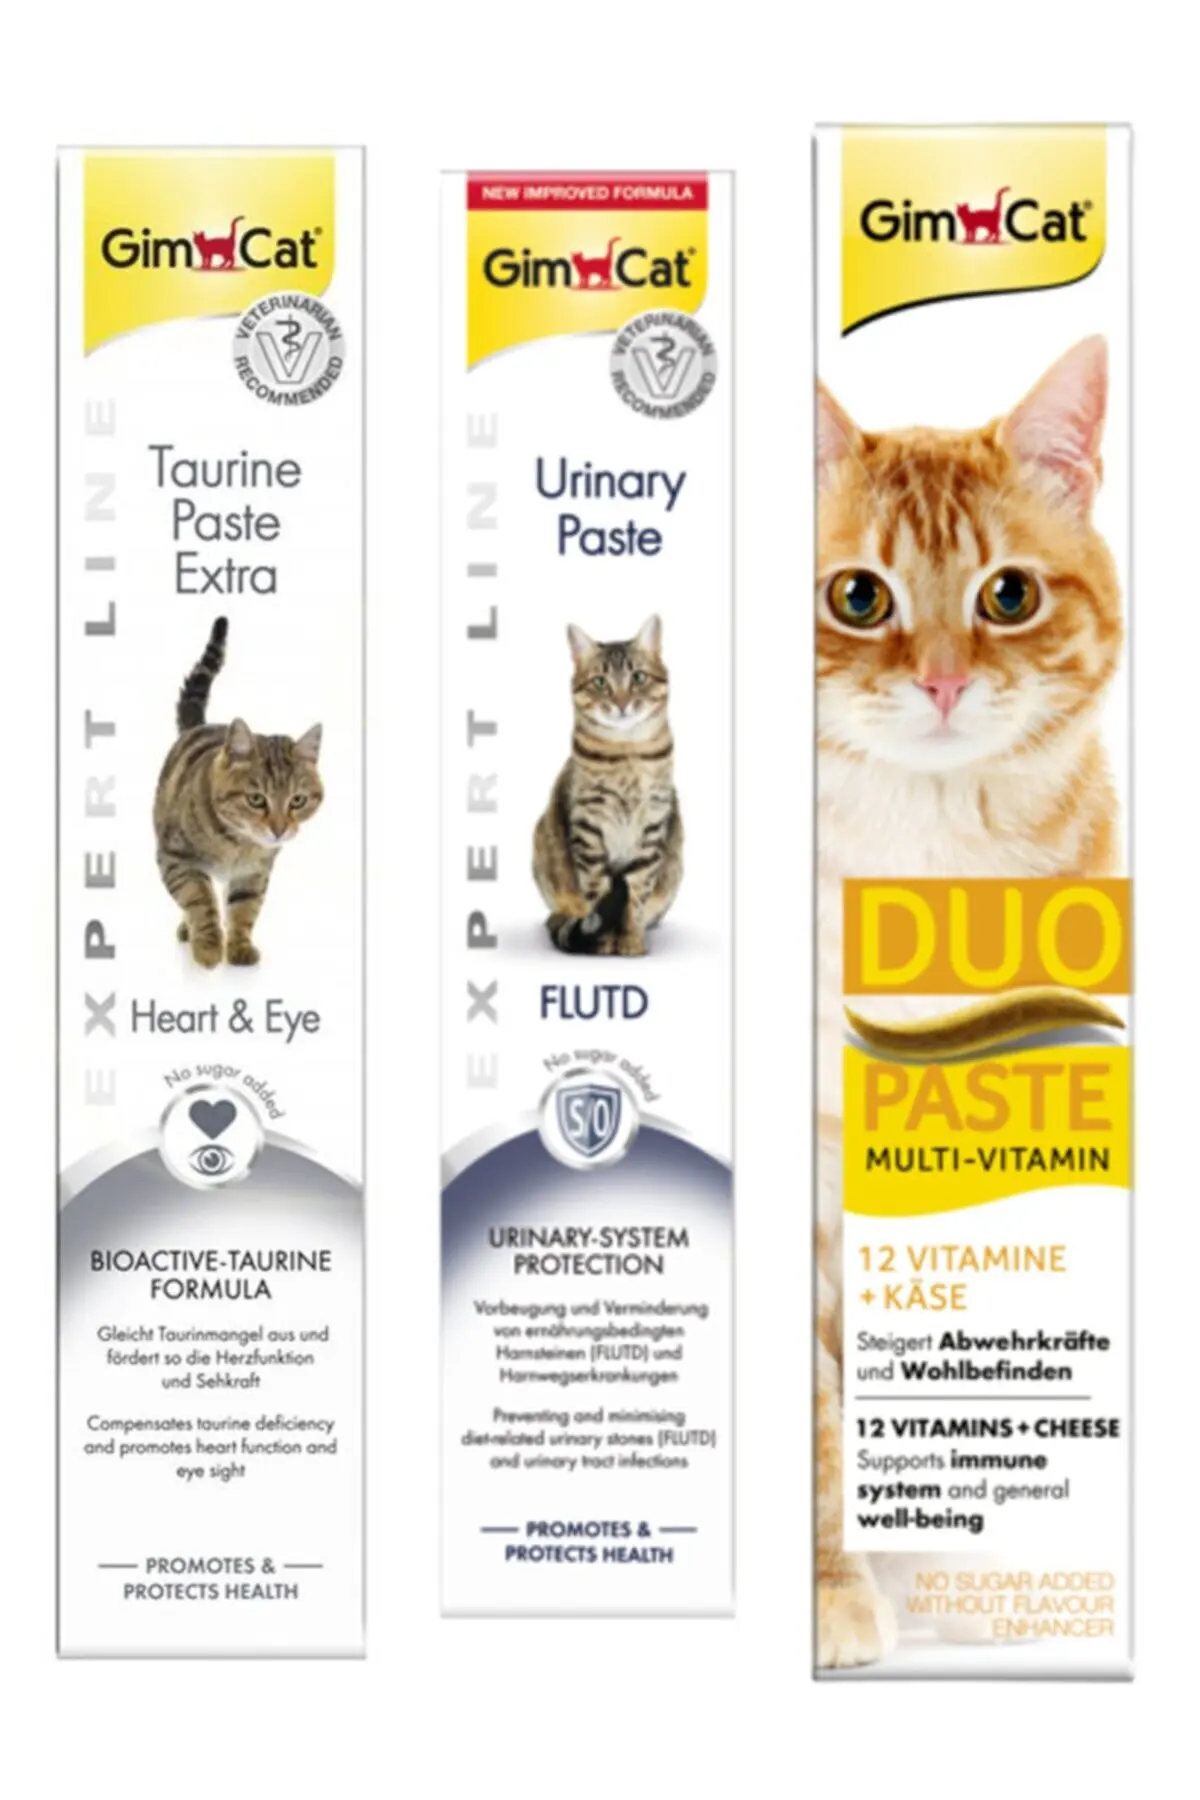 Gimcat Taurine Paste 50 gr + Urinary Paste 50 gr + Duo Paste Multi Vitamin with Cheese 50 gr